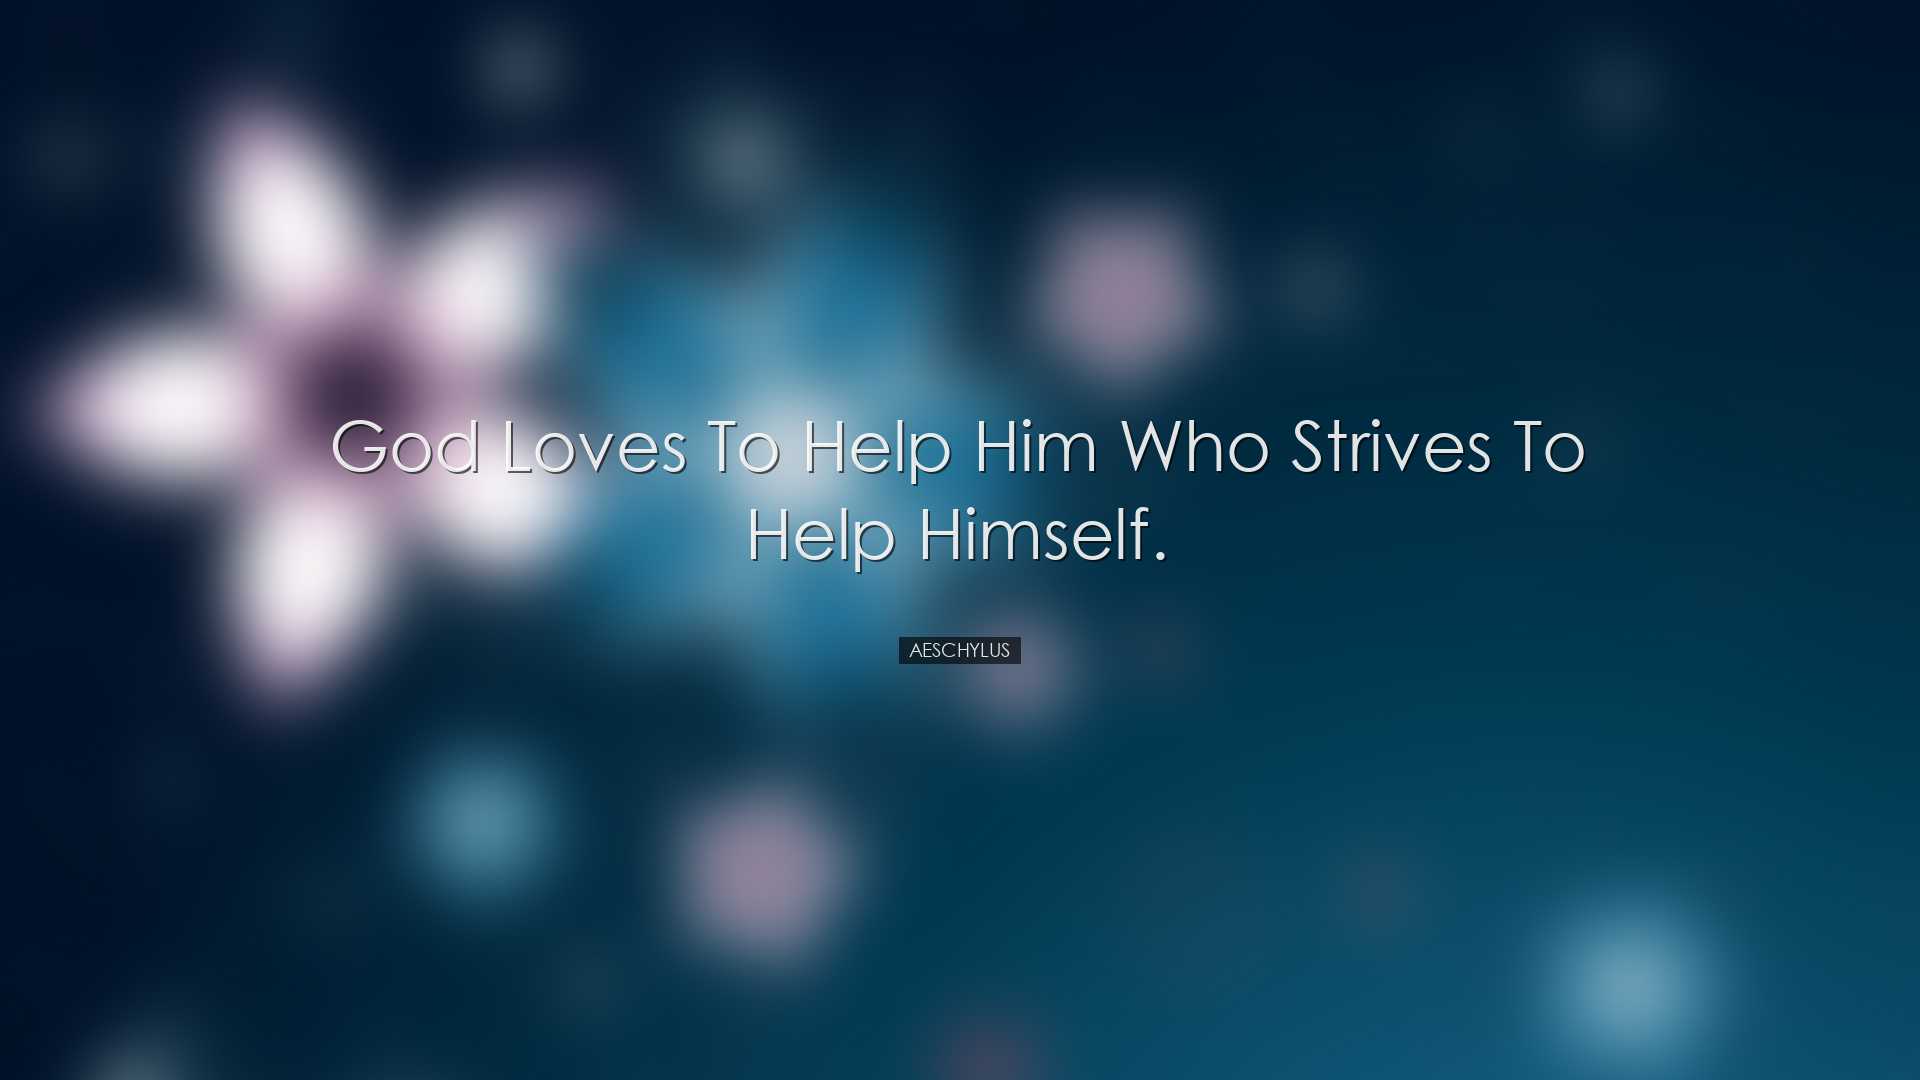 God loves to help him who strives to help himself. - Aeschylus